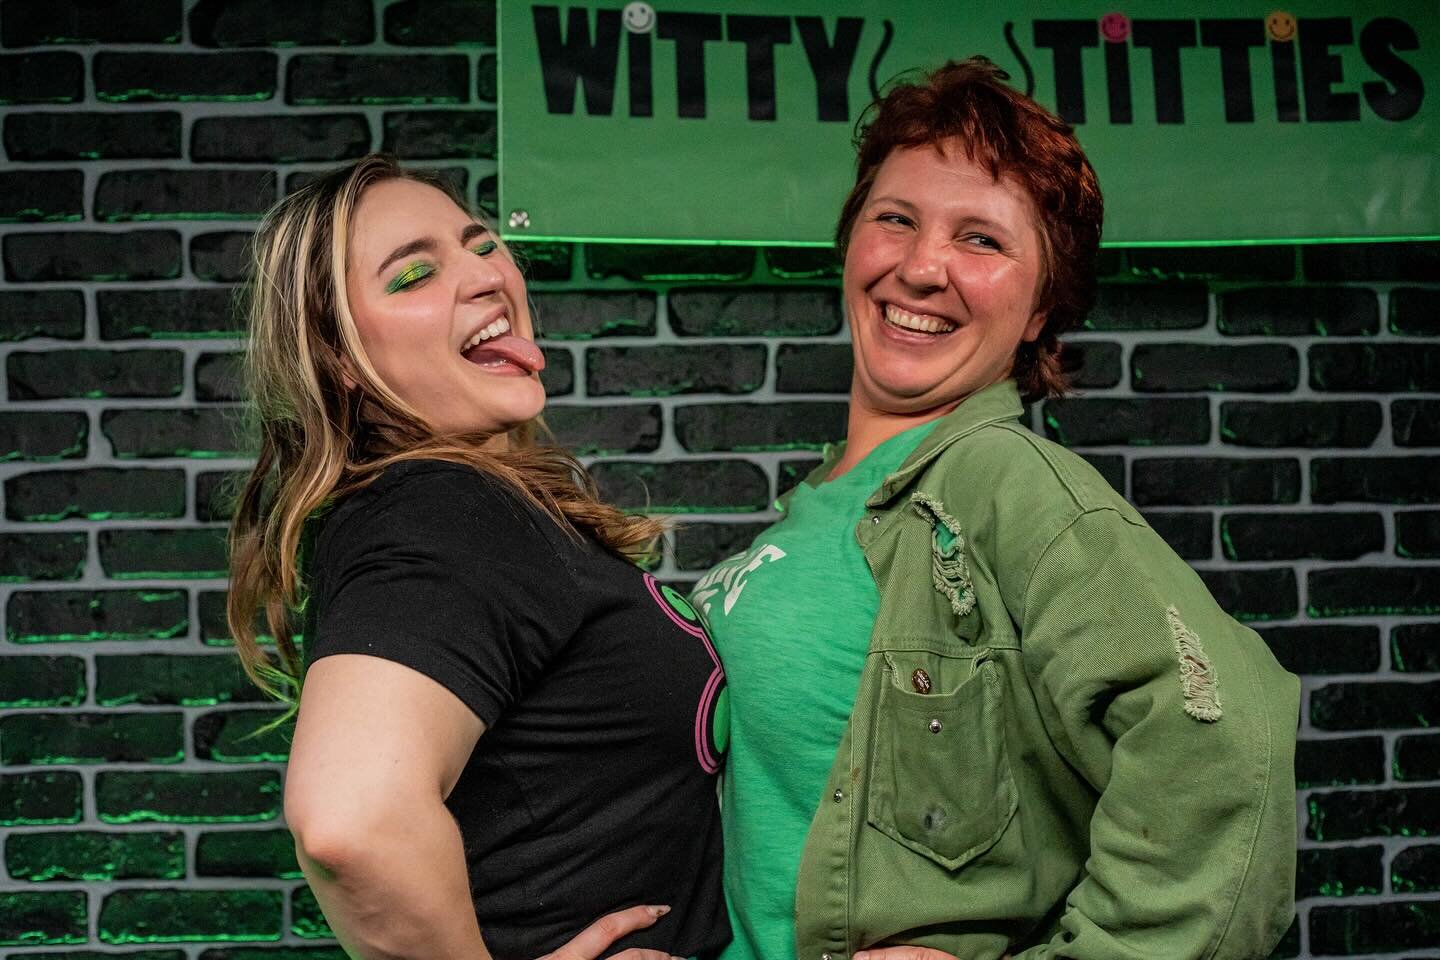 Happy St. Patrick&rsquo;s Day! 🍀Here&rsquo;s a fun throwback to our Get Lucky show last year, where we clearly had a blast ☘️

📷: @jamesriosstudios 

#stpatricksday #stpaddysday #throwback #getlucky #wittytitties #wittytittiescomedy #comedyshow #st